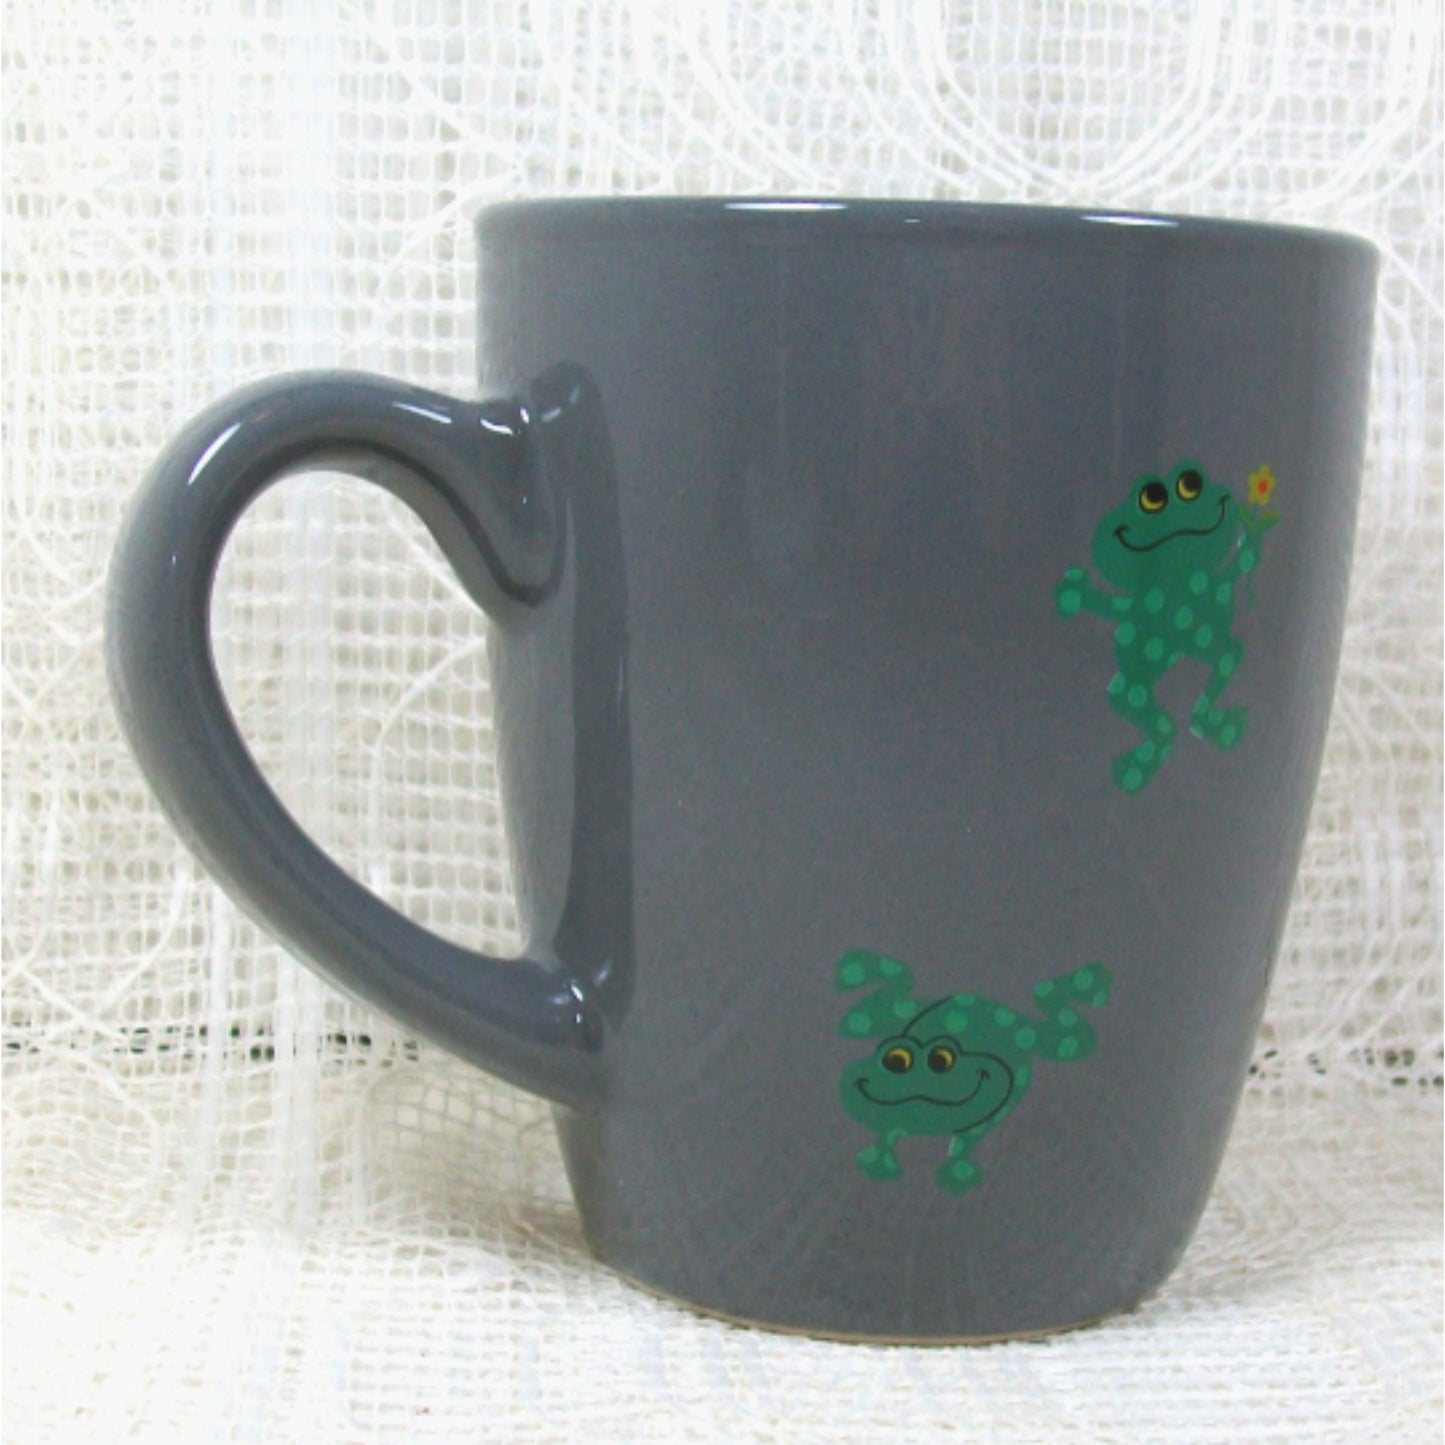 Frog Ceramic Coffee Mug / Gray Coffee Cup With Frogs / Unique Coffee Mug / Beverage Container  / Frog Decor / Gift for Frog Lover / Tea Mug